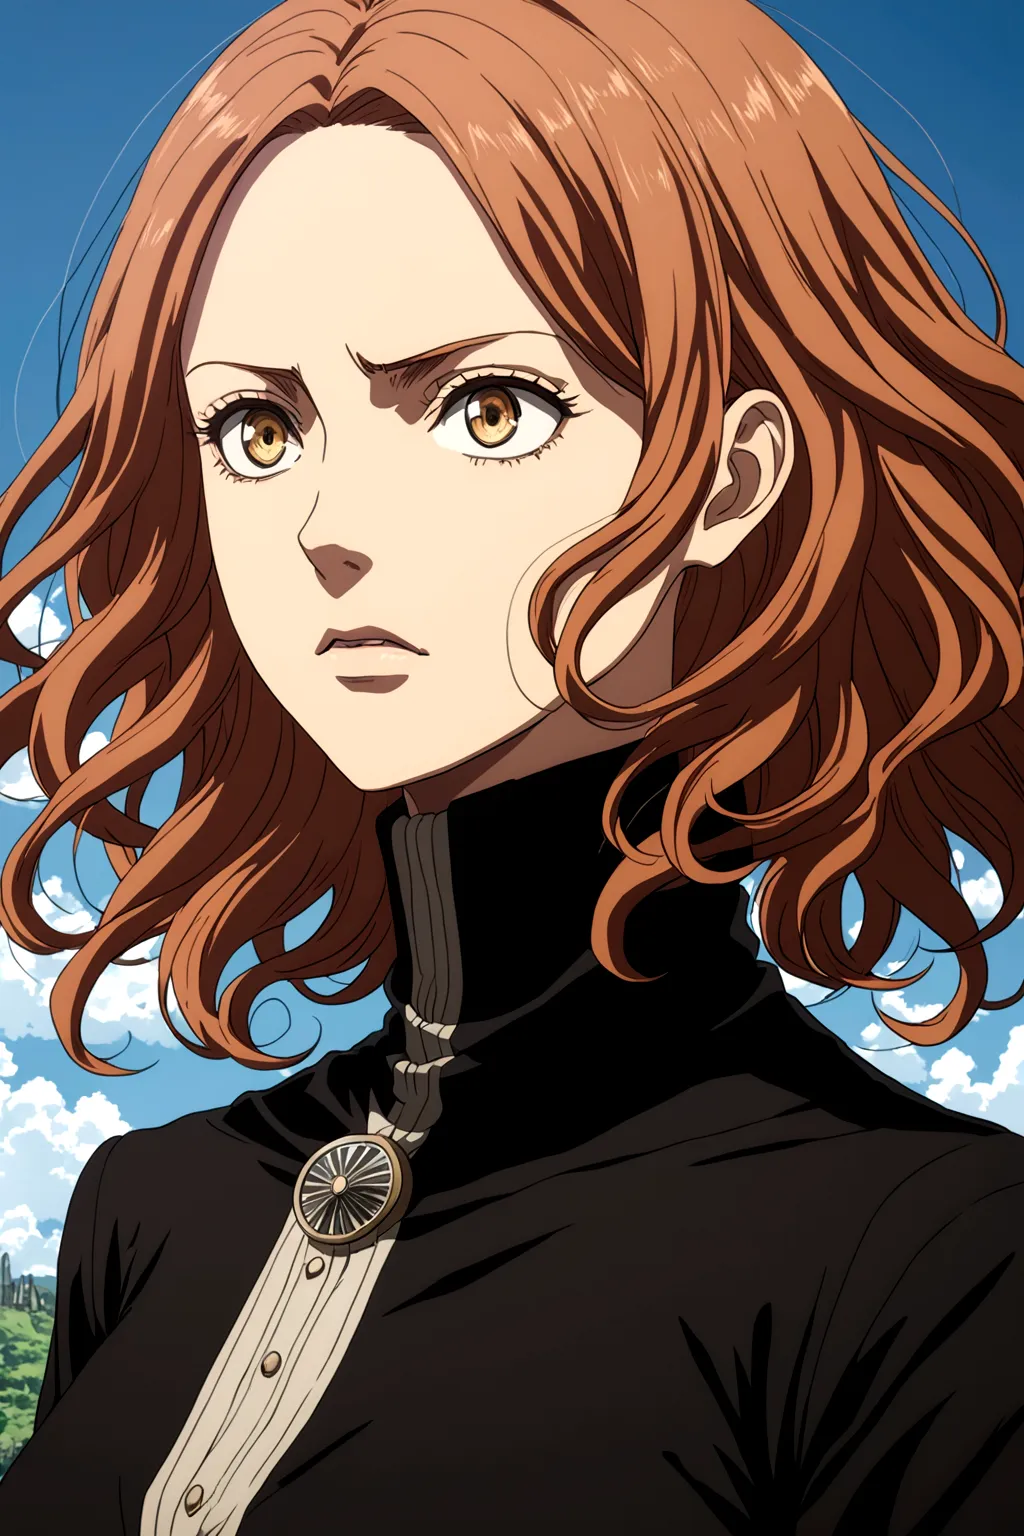 Attack on Titan anime style, woman with ginger wavy hair. She wears a black high-necked blouse